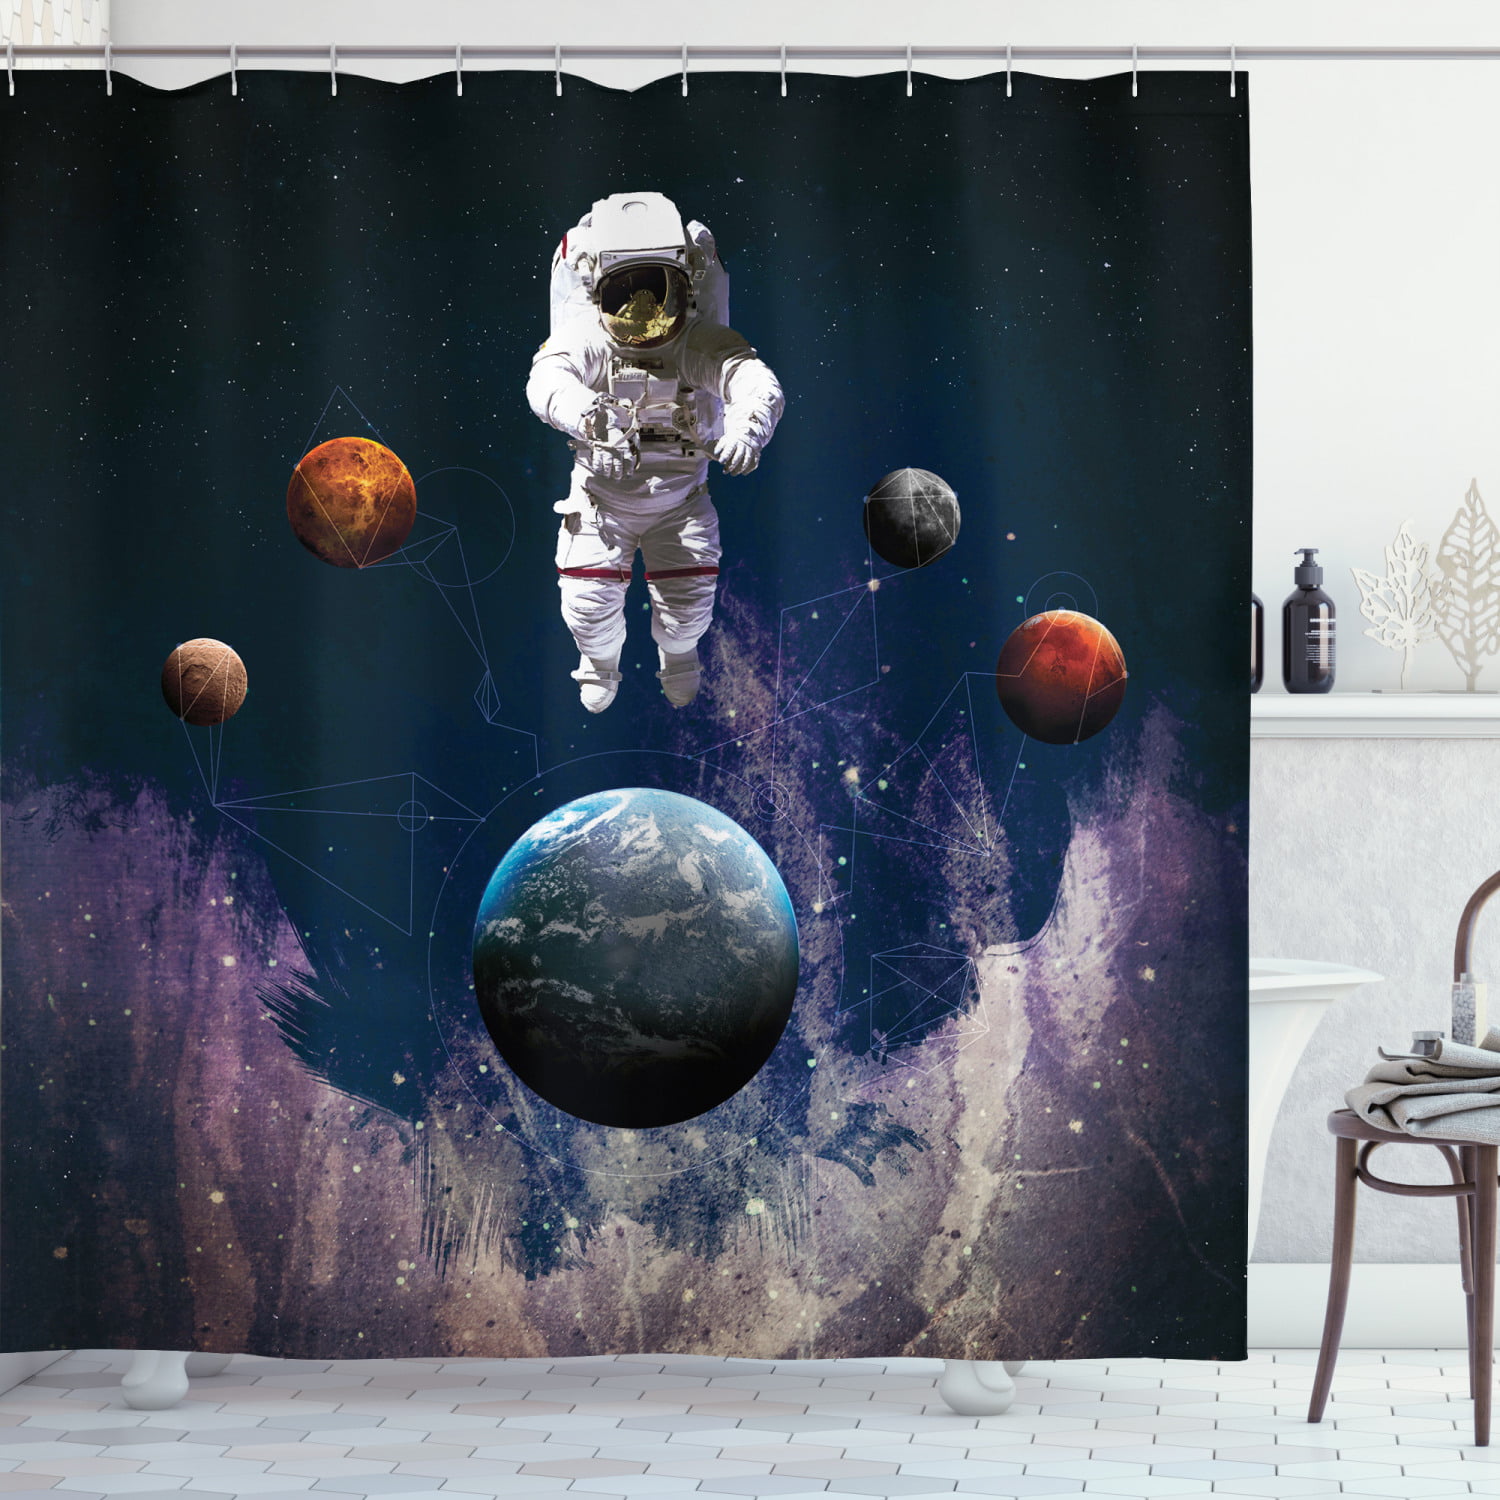 Outer Space Universe Shower Curtain Bathroom Waterproof Fabric Hooks Included 